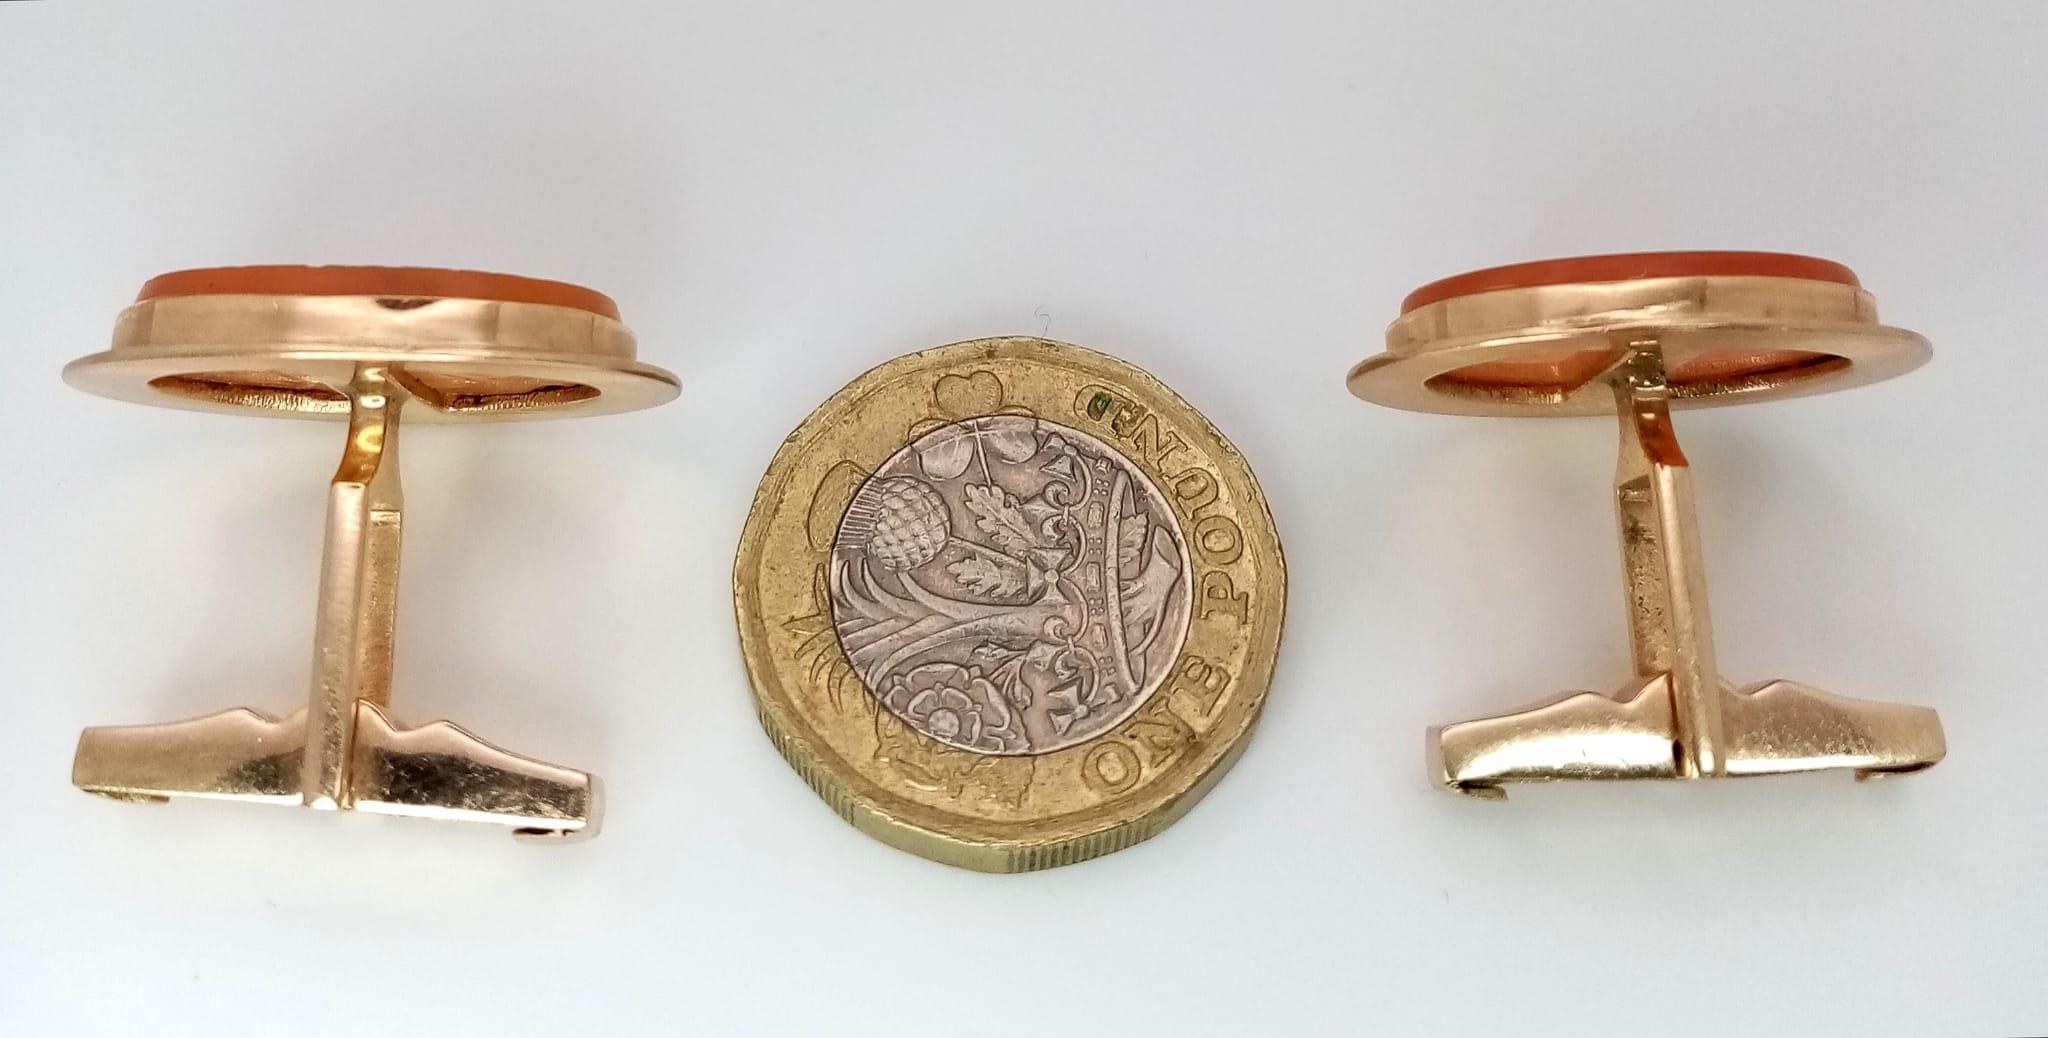 A Pair of Vintage 14K Gold Hand-Carved Orange Hardstone Cufflinks. 13.2g total weight. - Image 4 of 5